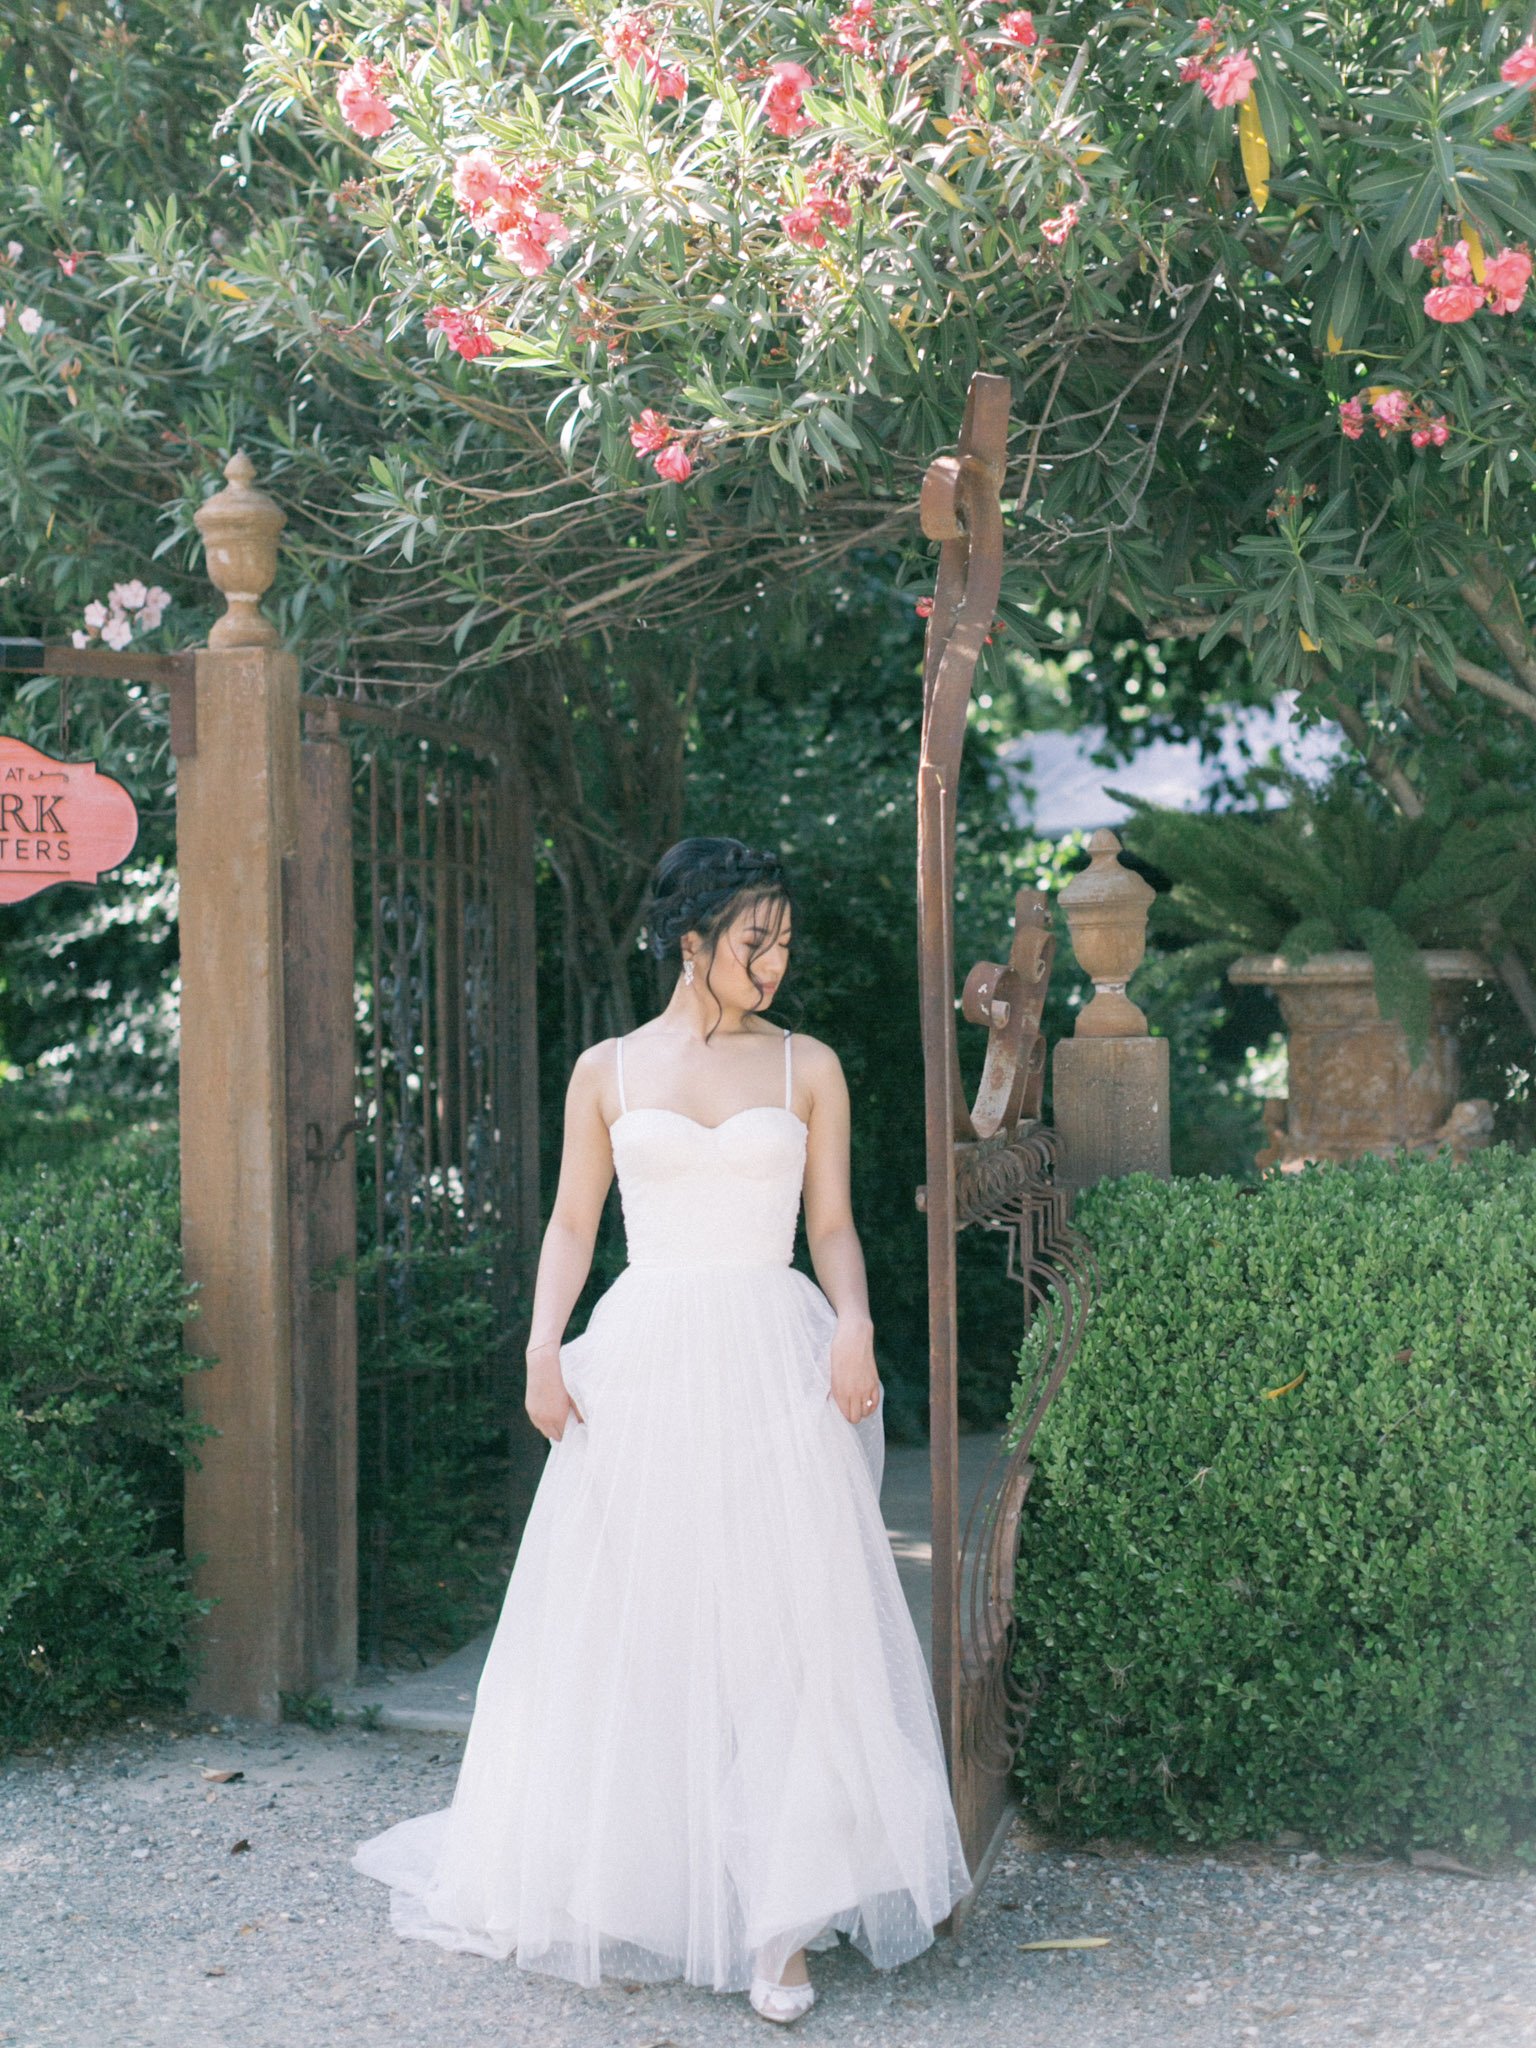 The 18 Best Structured Wedding Gowns for an Elegant, Figure-Flattering Look